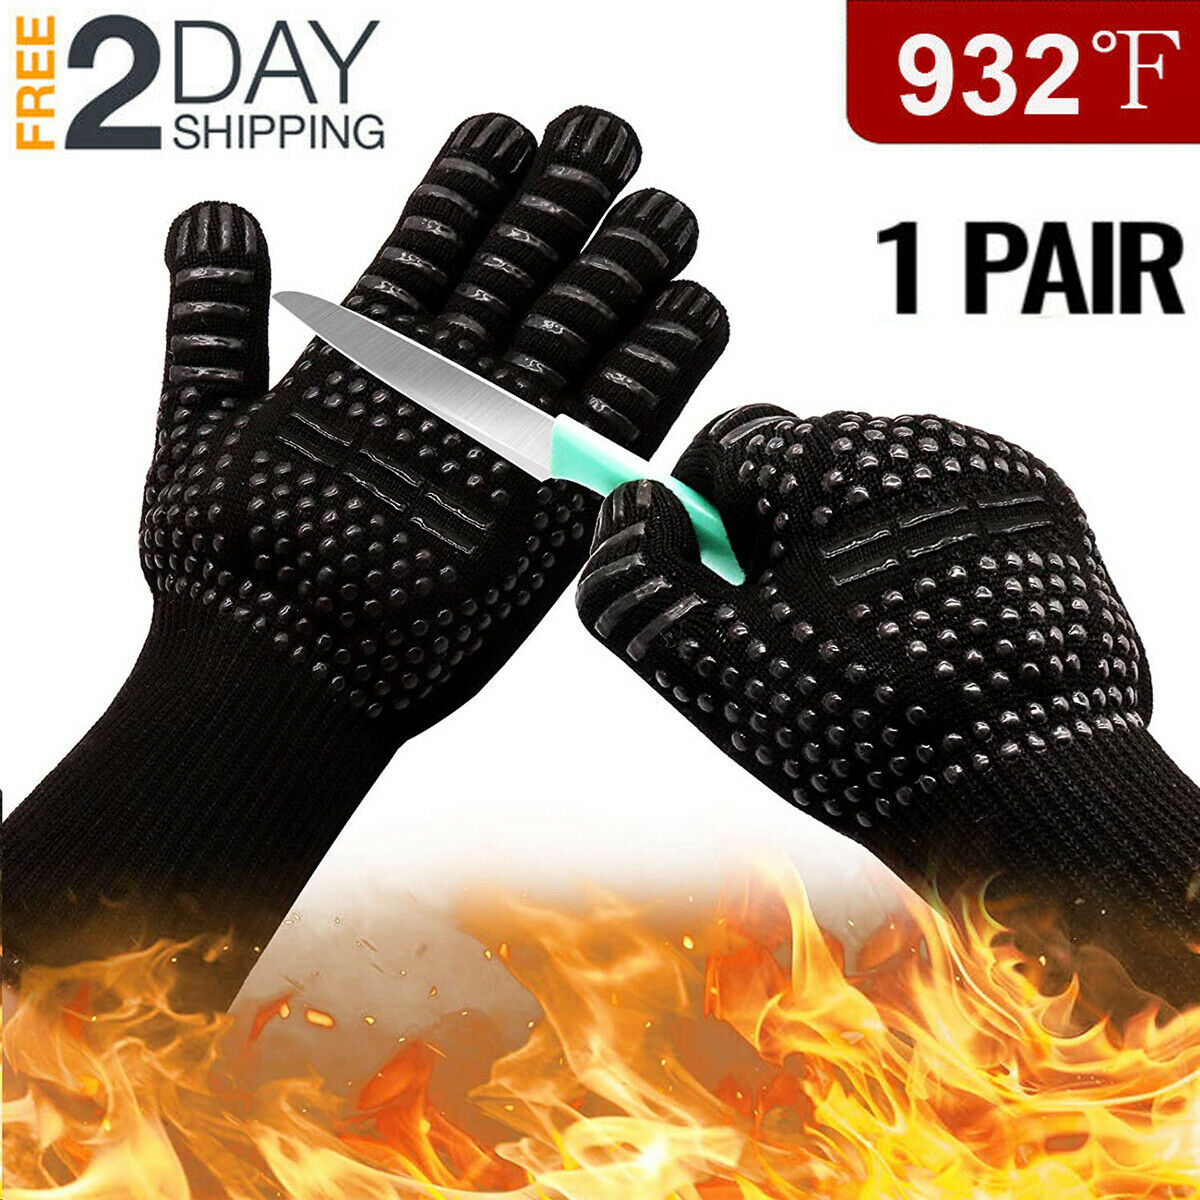 2pcs 932°f Extreme Heat Resistant Cooking Oven Gloves Bbq Hot Grilling Gloves